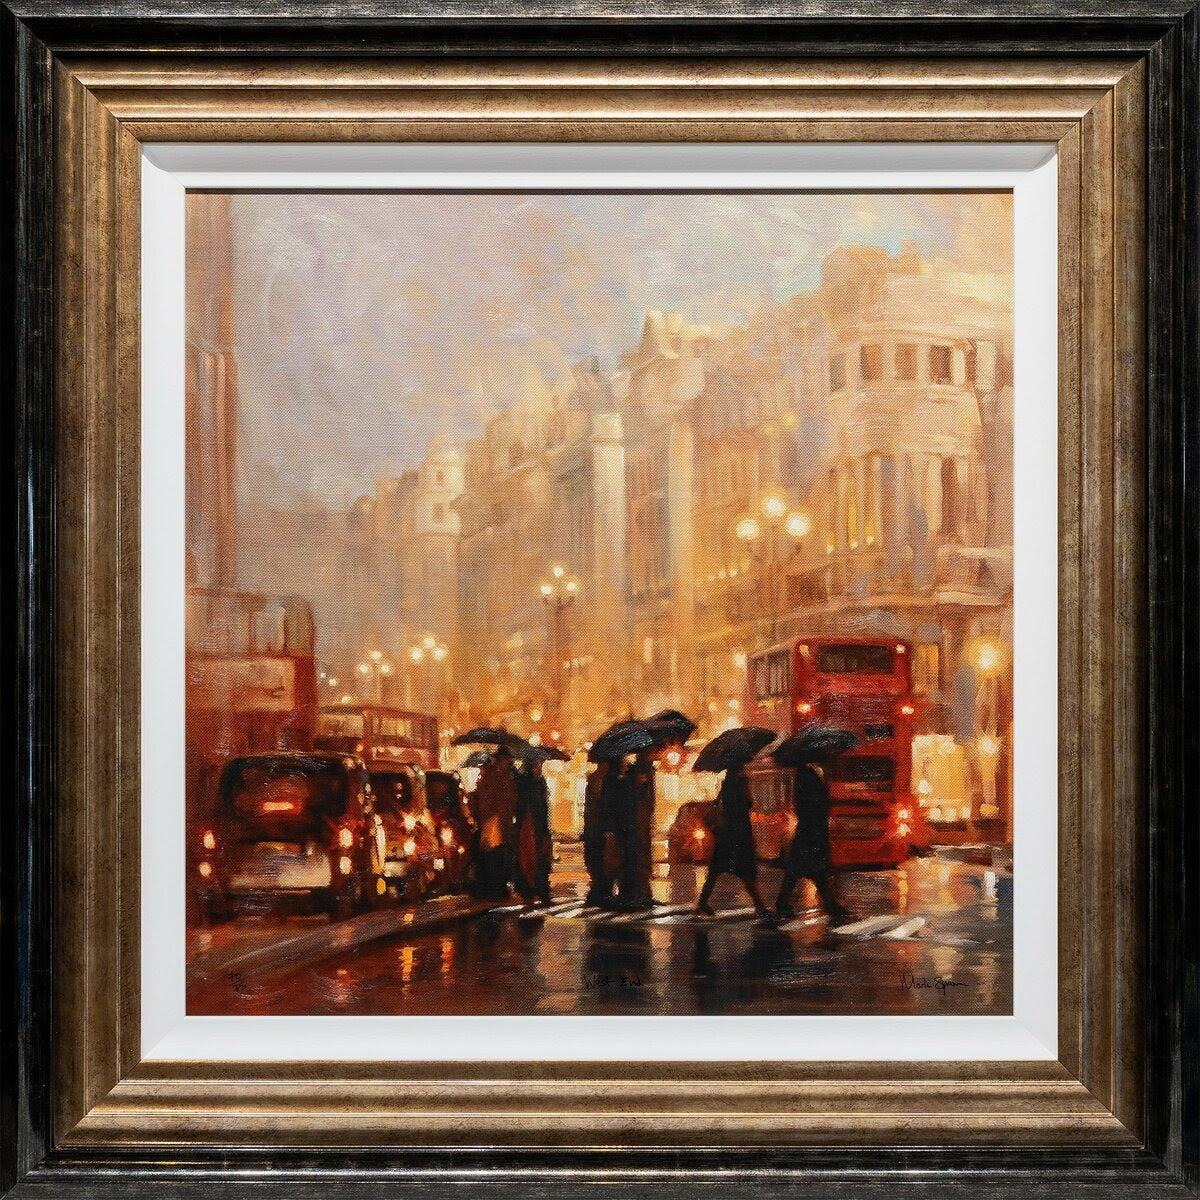 West End limited edition print by Mark Spain